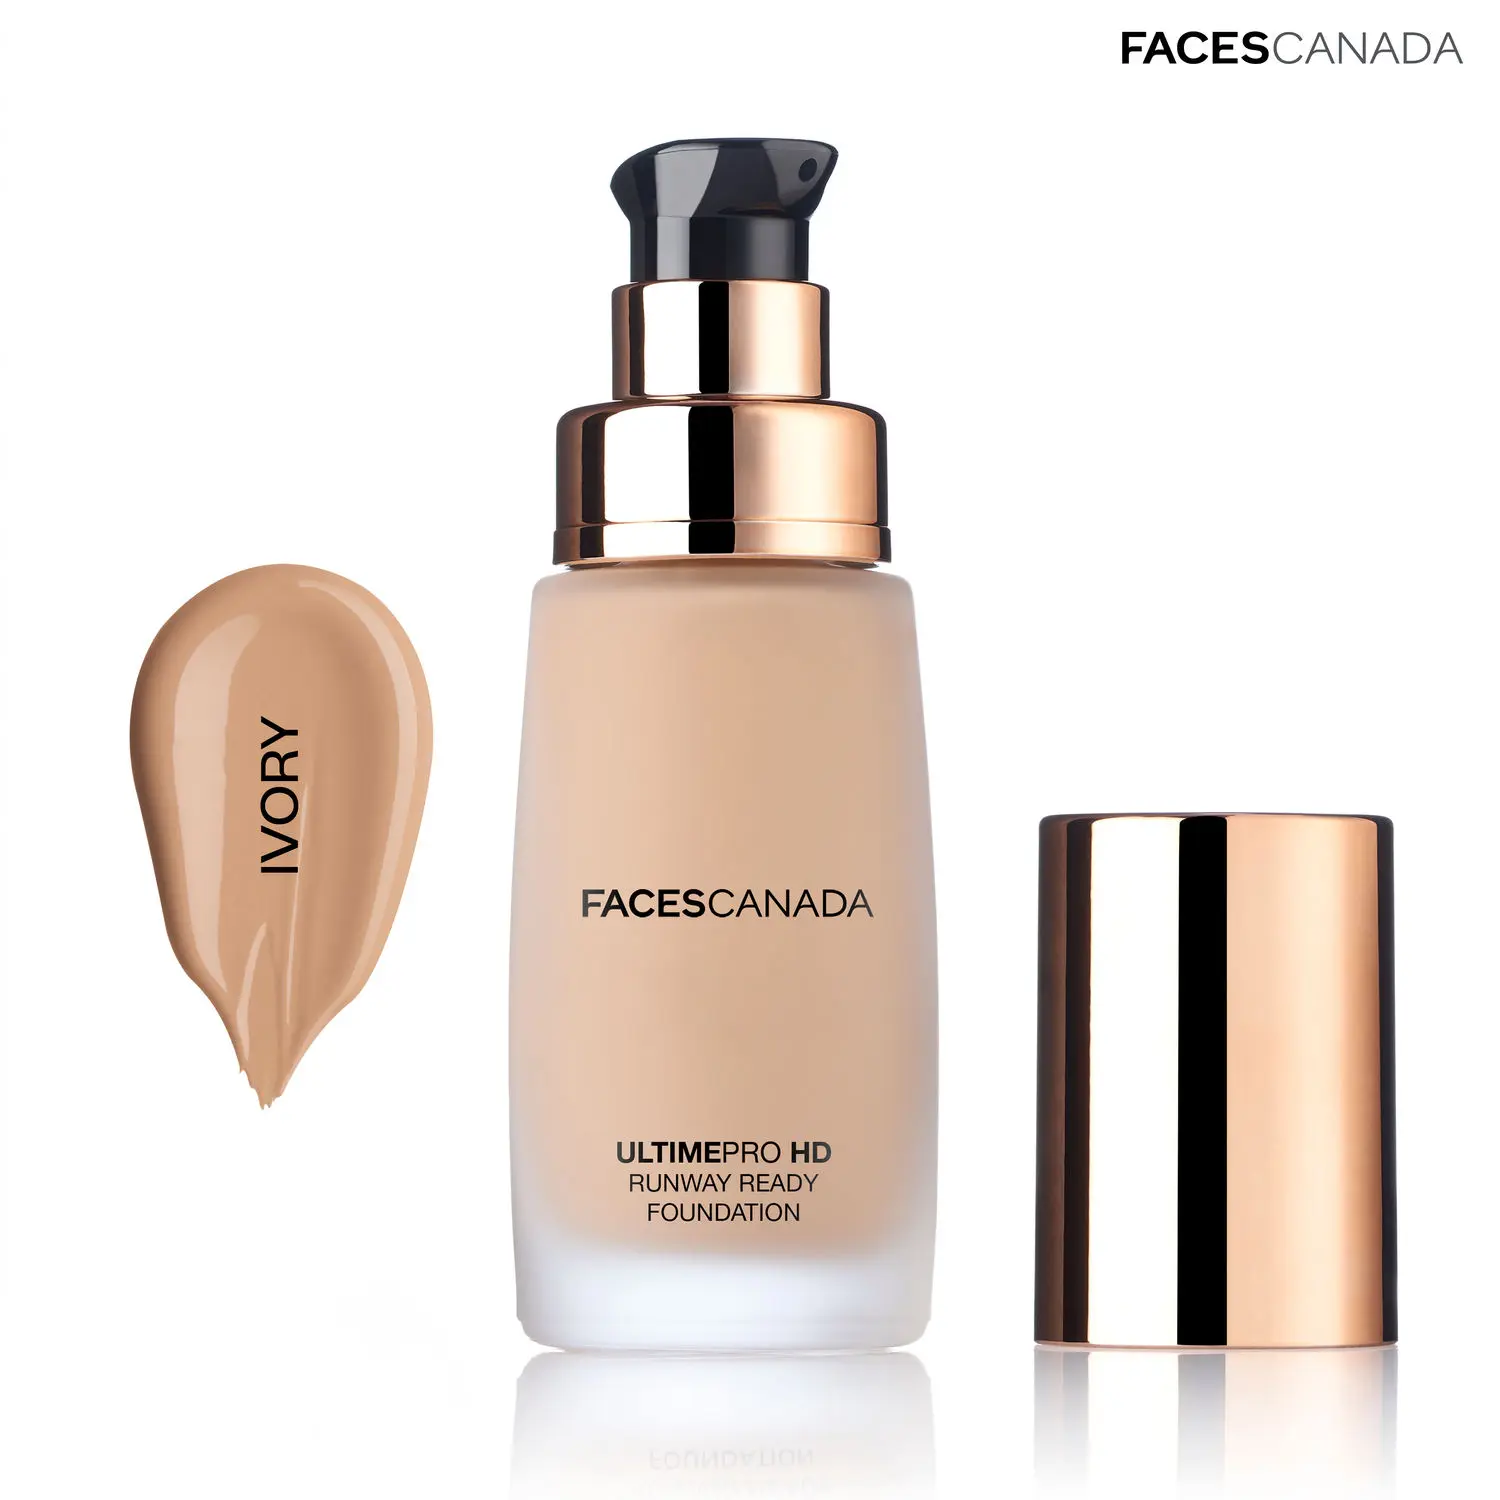 Faces Canada Ultime Pro HD Runway Ready Foundation - Ivory 01 (30 ml)